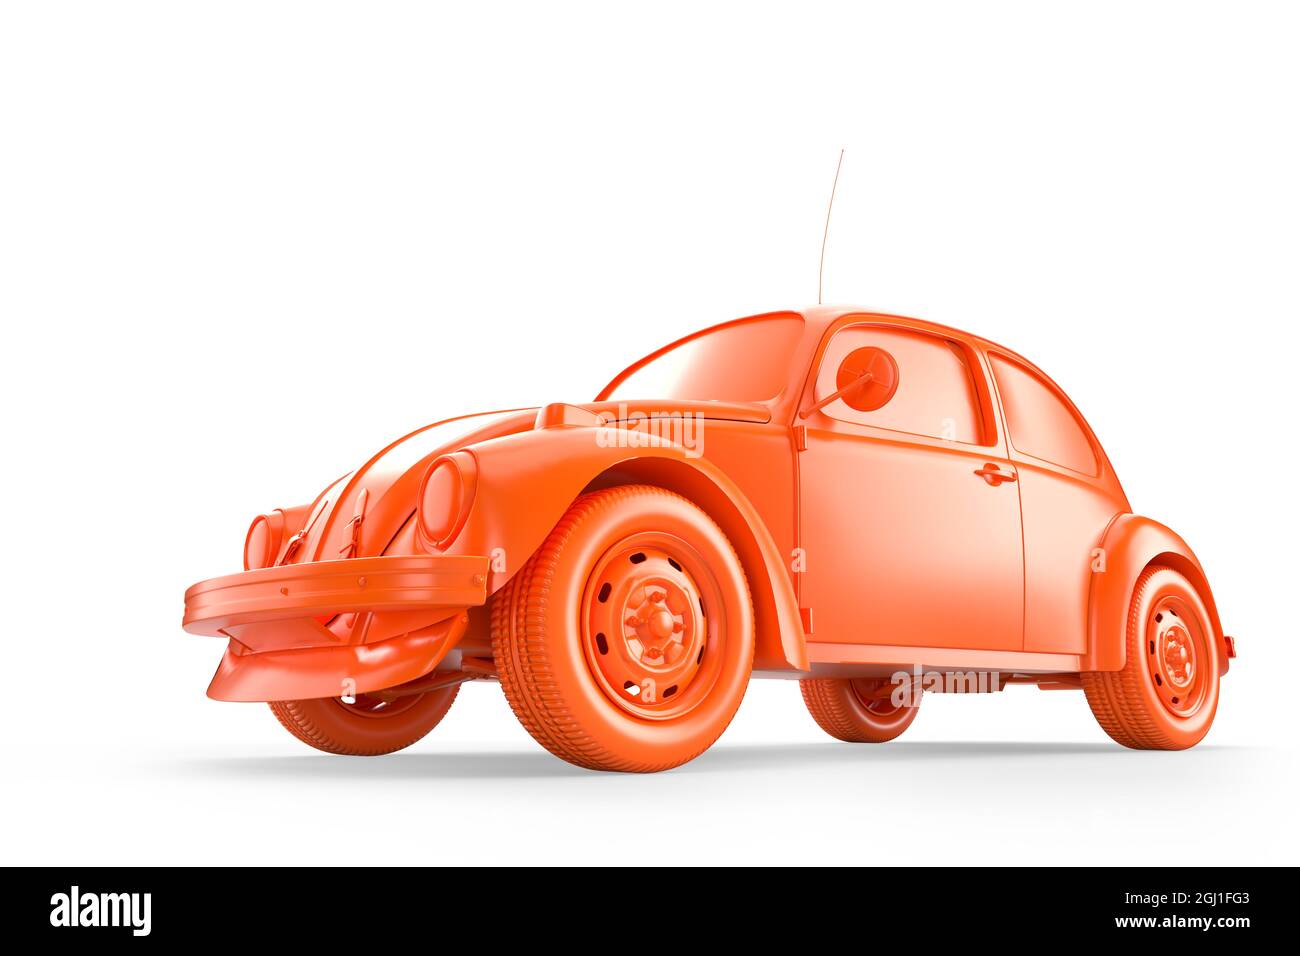 Side view of red vintage classic car on white background. 3D illustration Stock Photo